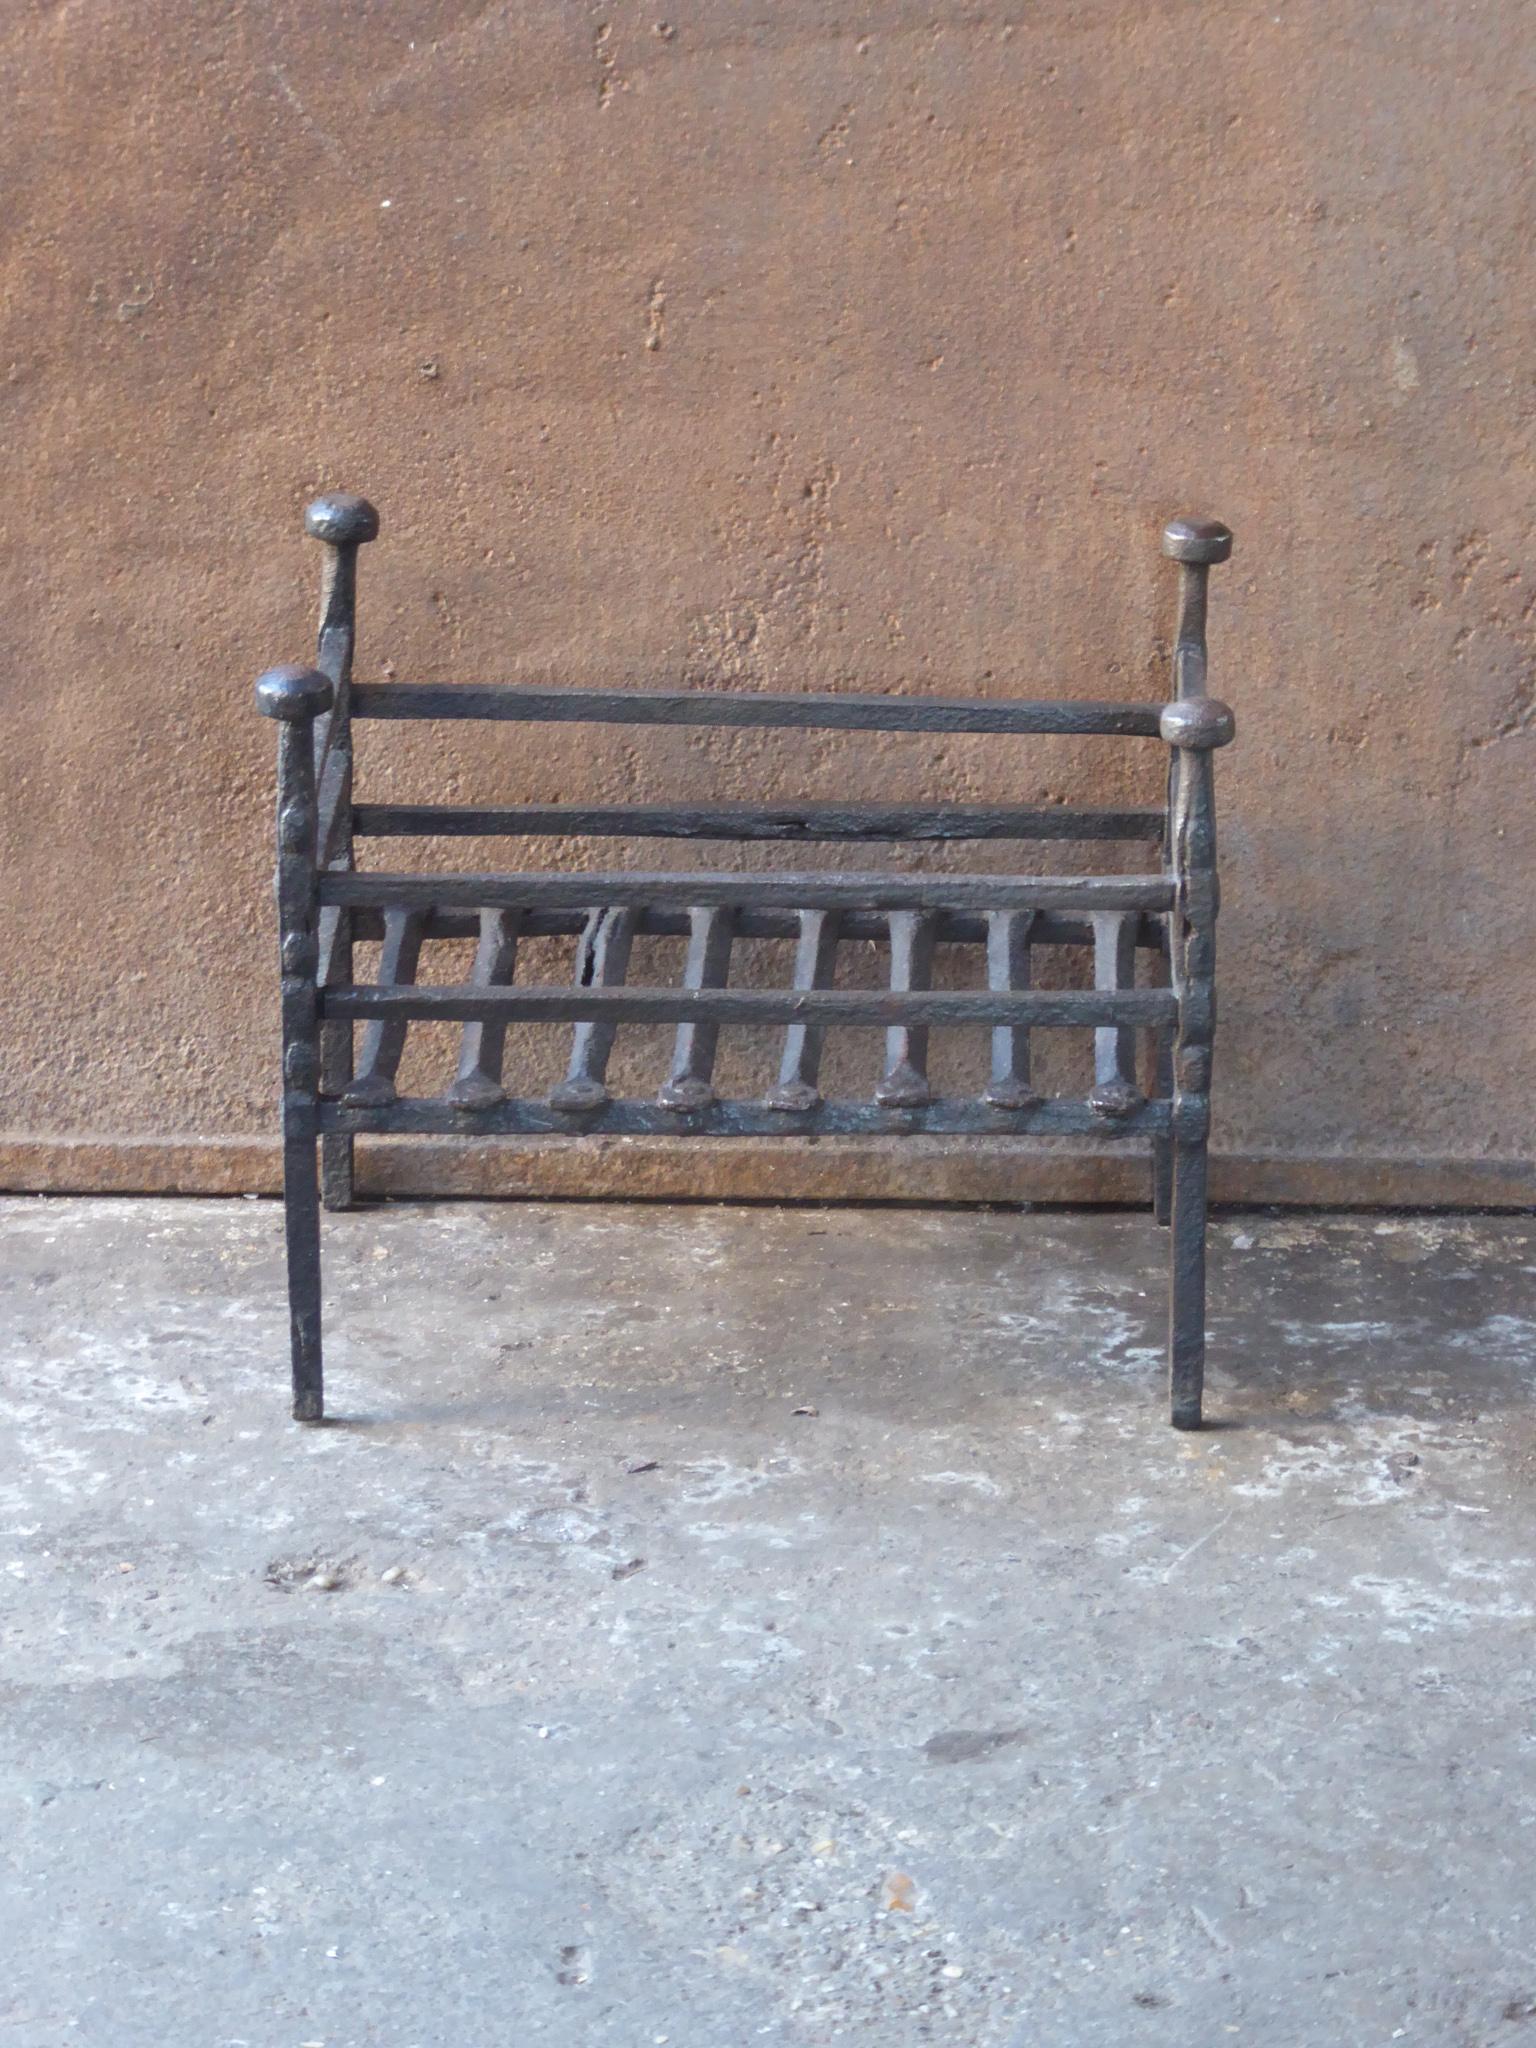 Forged 18th-19th Century Dutch Neoclassical Fireplace Grate or Fire Basket